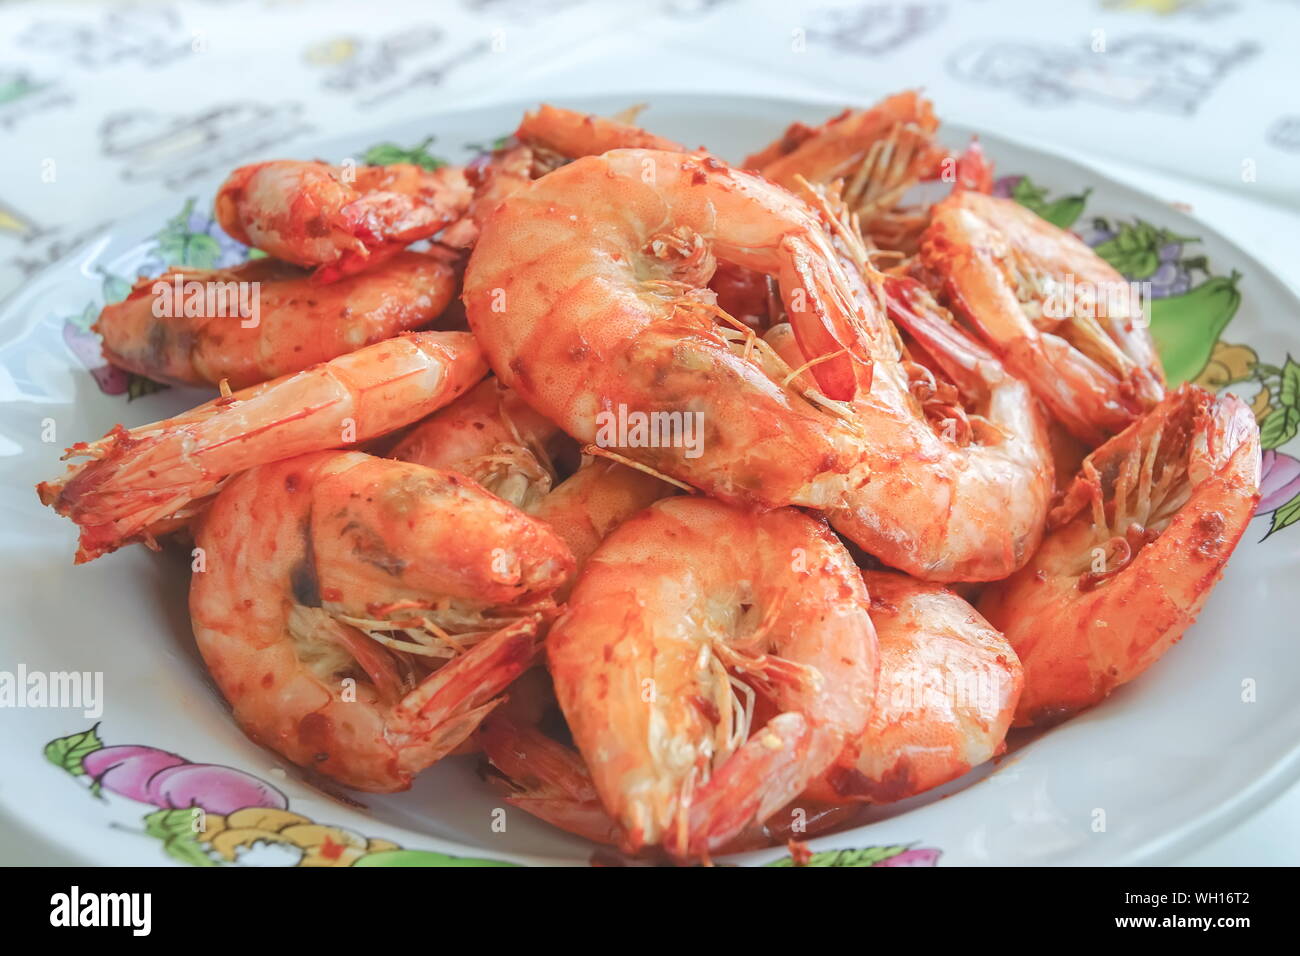 Closed up Oil free fried shrimps in plate made by air frier. Stock Photo